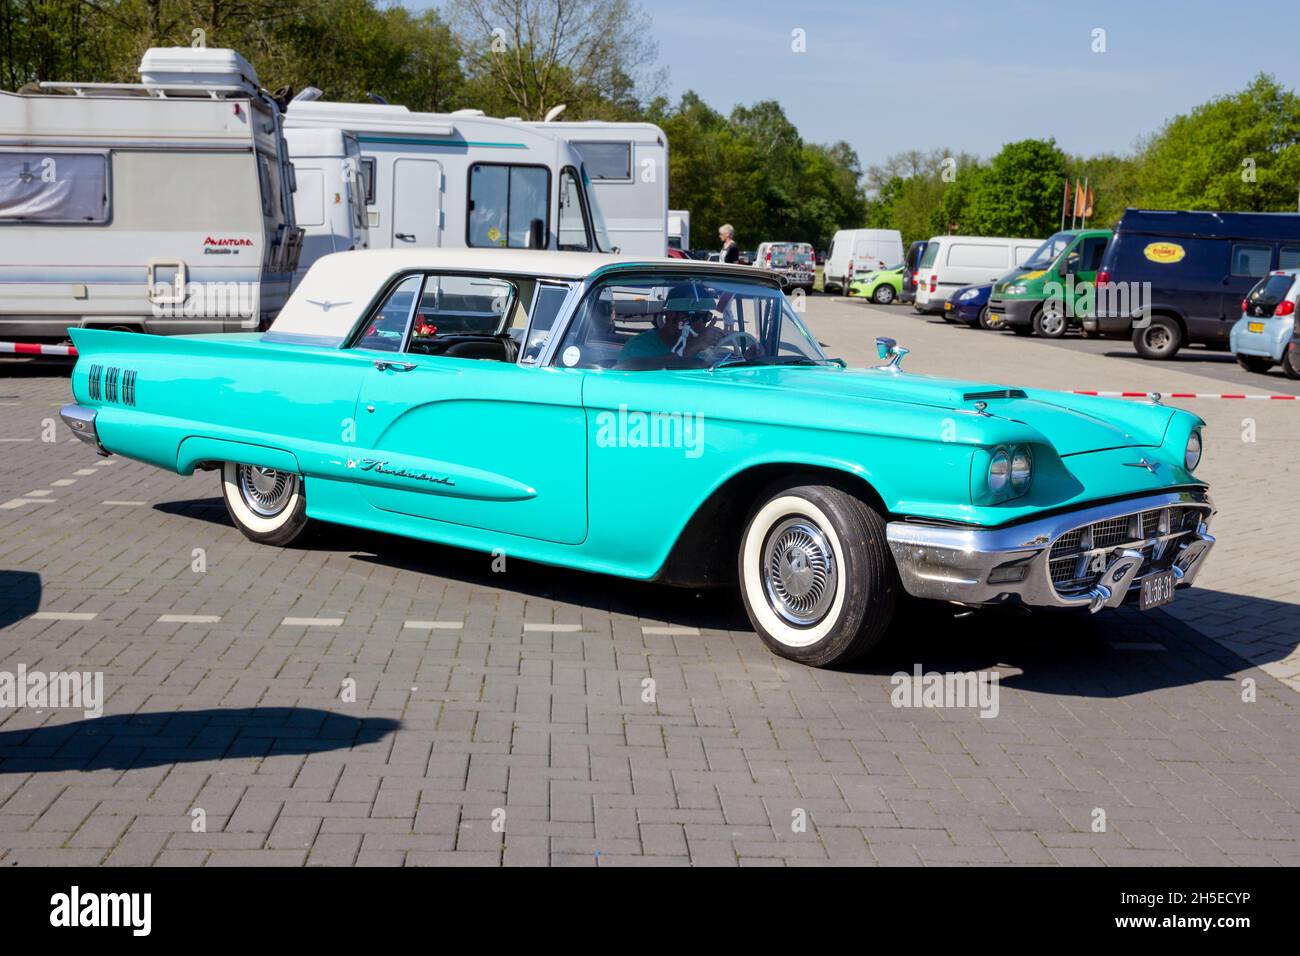 1960 Ford Thunderbird classic car on the parking lot. Rosmalen, The Netherlands - May 8, 2016 Stock Photo